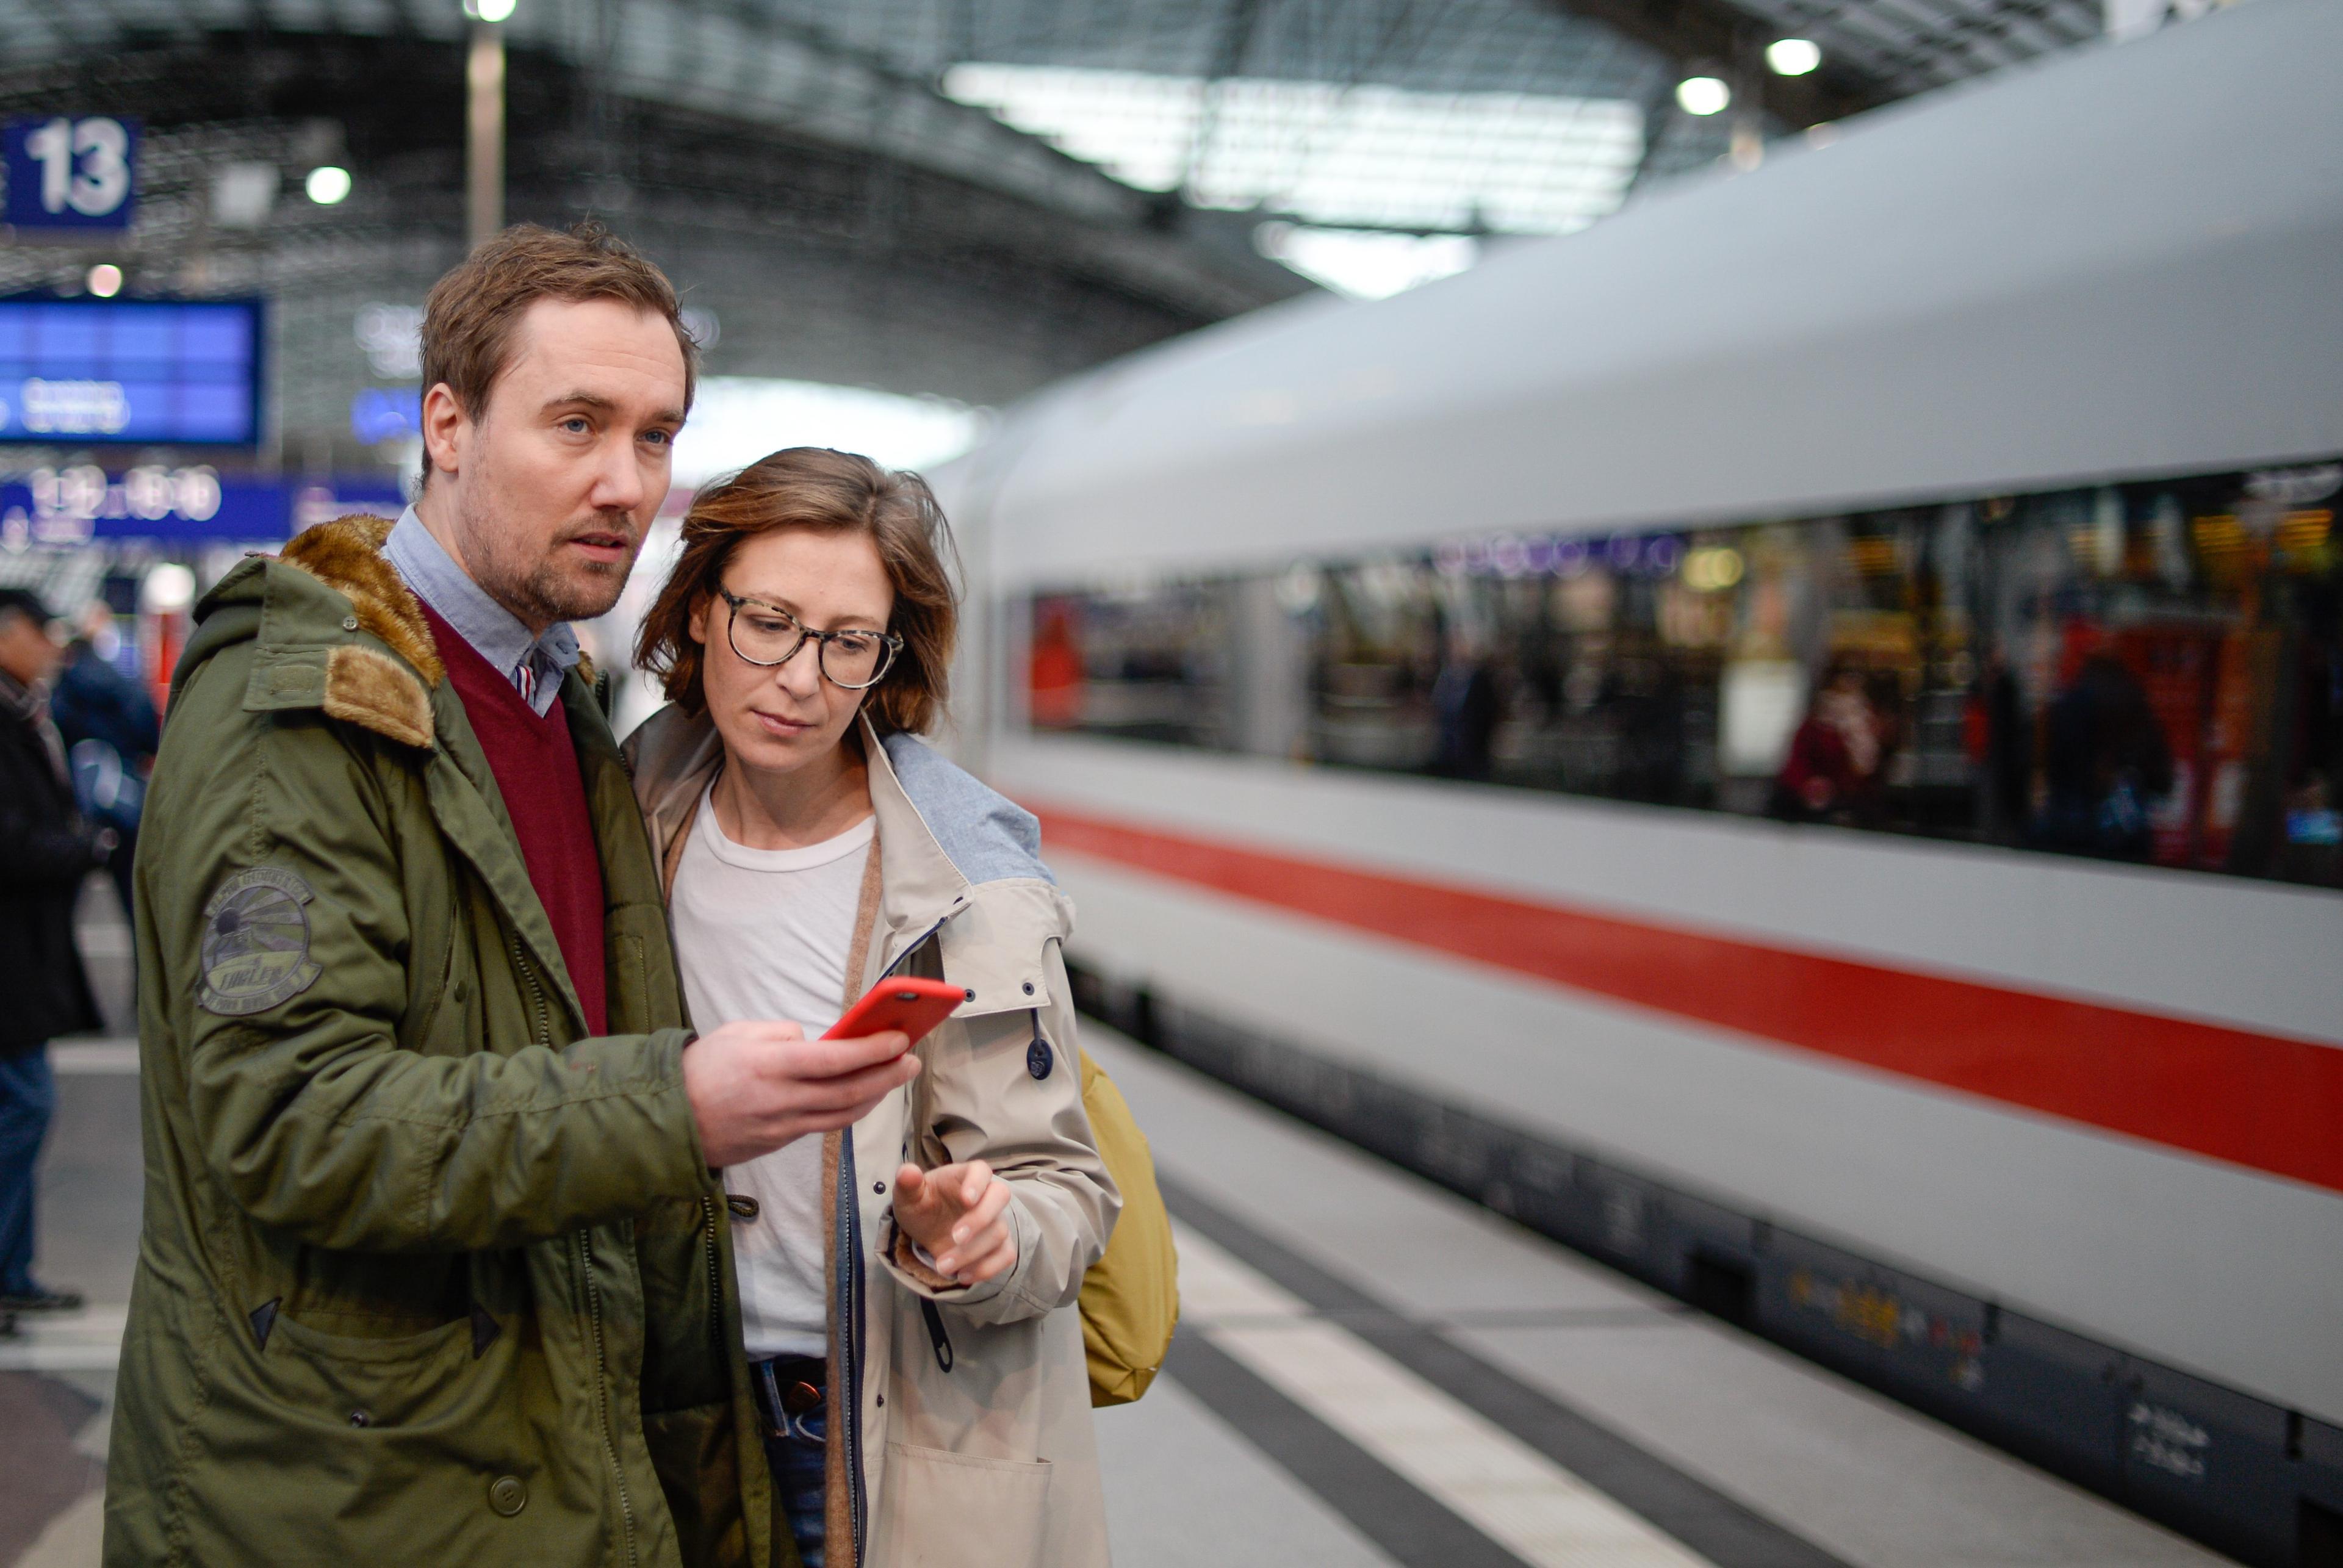 Travellers on the platform with a smartphone in their hand.